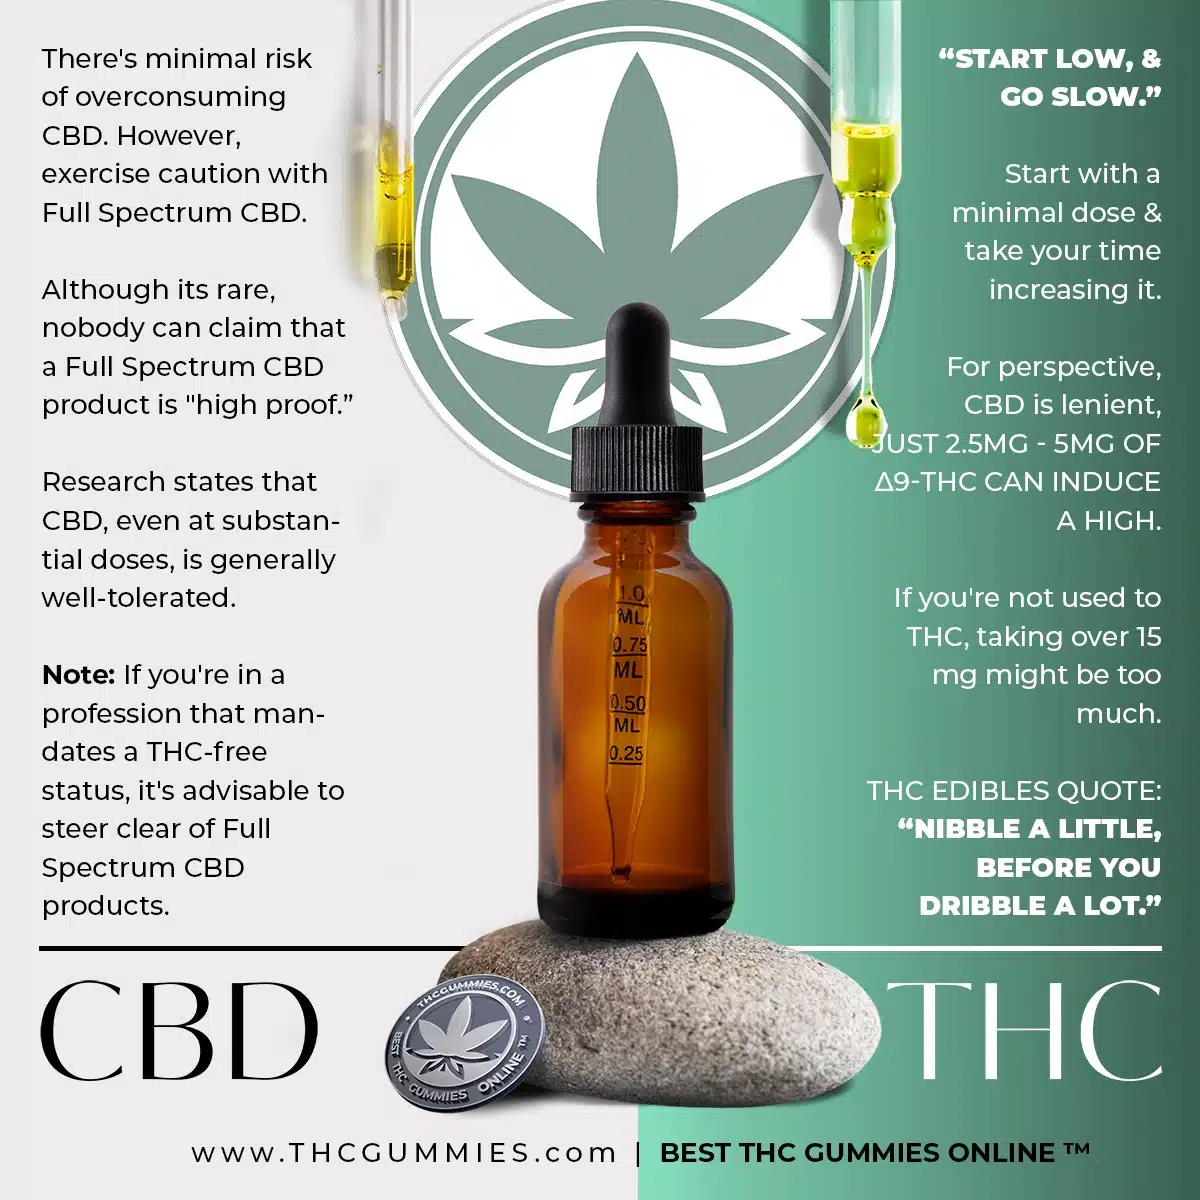 A cbd vs thc infographic meme by thcgummies. Com that shares the differences in dosing precautions. On the left side (cbd), it reads the following: there's minimal risk of overconsuming cbd. However, exercise caution with full spectrum cbd. Although its rare, nobody can claim that a full spectrum cbd product is "high proof. ” research states that cbd, even at substantial doses, is generally well-tolerated. Note: if you're in a profession that mandates a thc-free status, it's advisable to steer clear of full spectrum cbd products. Thc: “start low, & go slow. ”start with a minimal dose & take your time increasing it. For perspective, cbd is lenient, just 2. 5mg - 5mg of ∆9-thc can induce a high. If you're not used to thc, taking over 15 mg might be too much. Thc edibles quote: 'nibble a little, before you dribble a lot. ' the information is beautifully displayed in two contrasting colored columns and hd photographs of dripping cbd oil and thc oil from glass squeeze droppers.